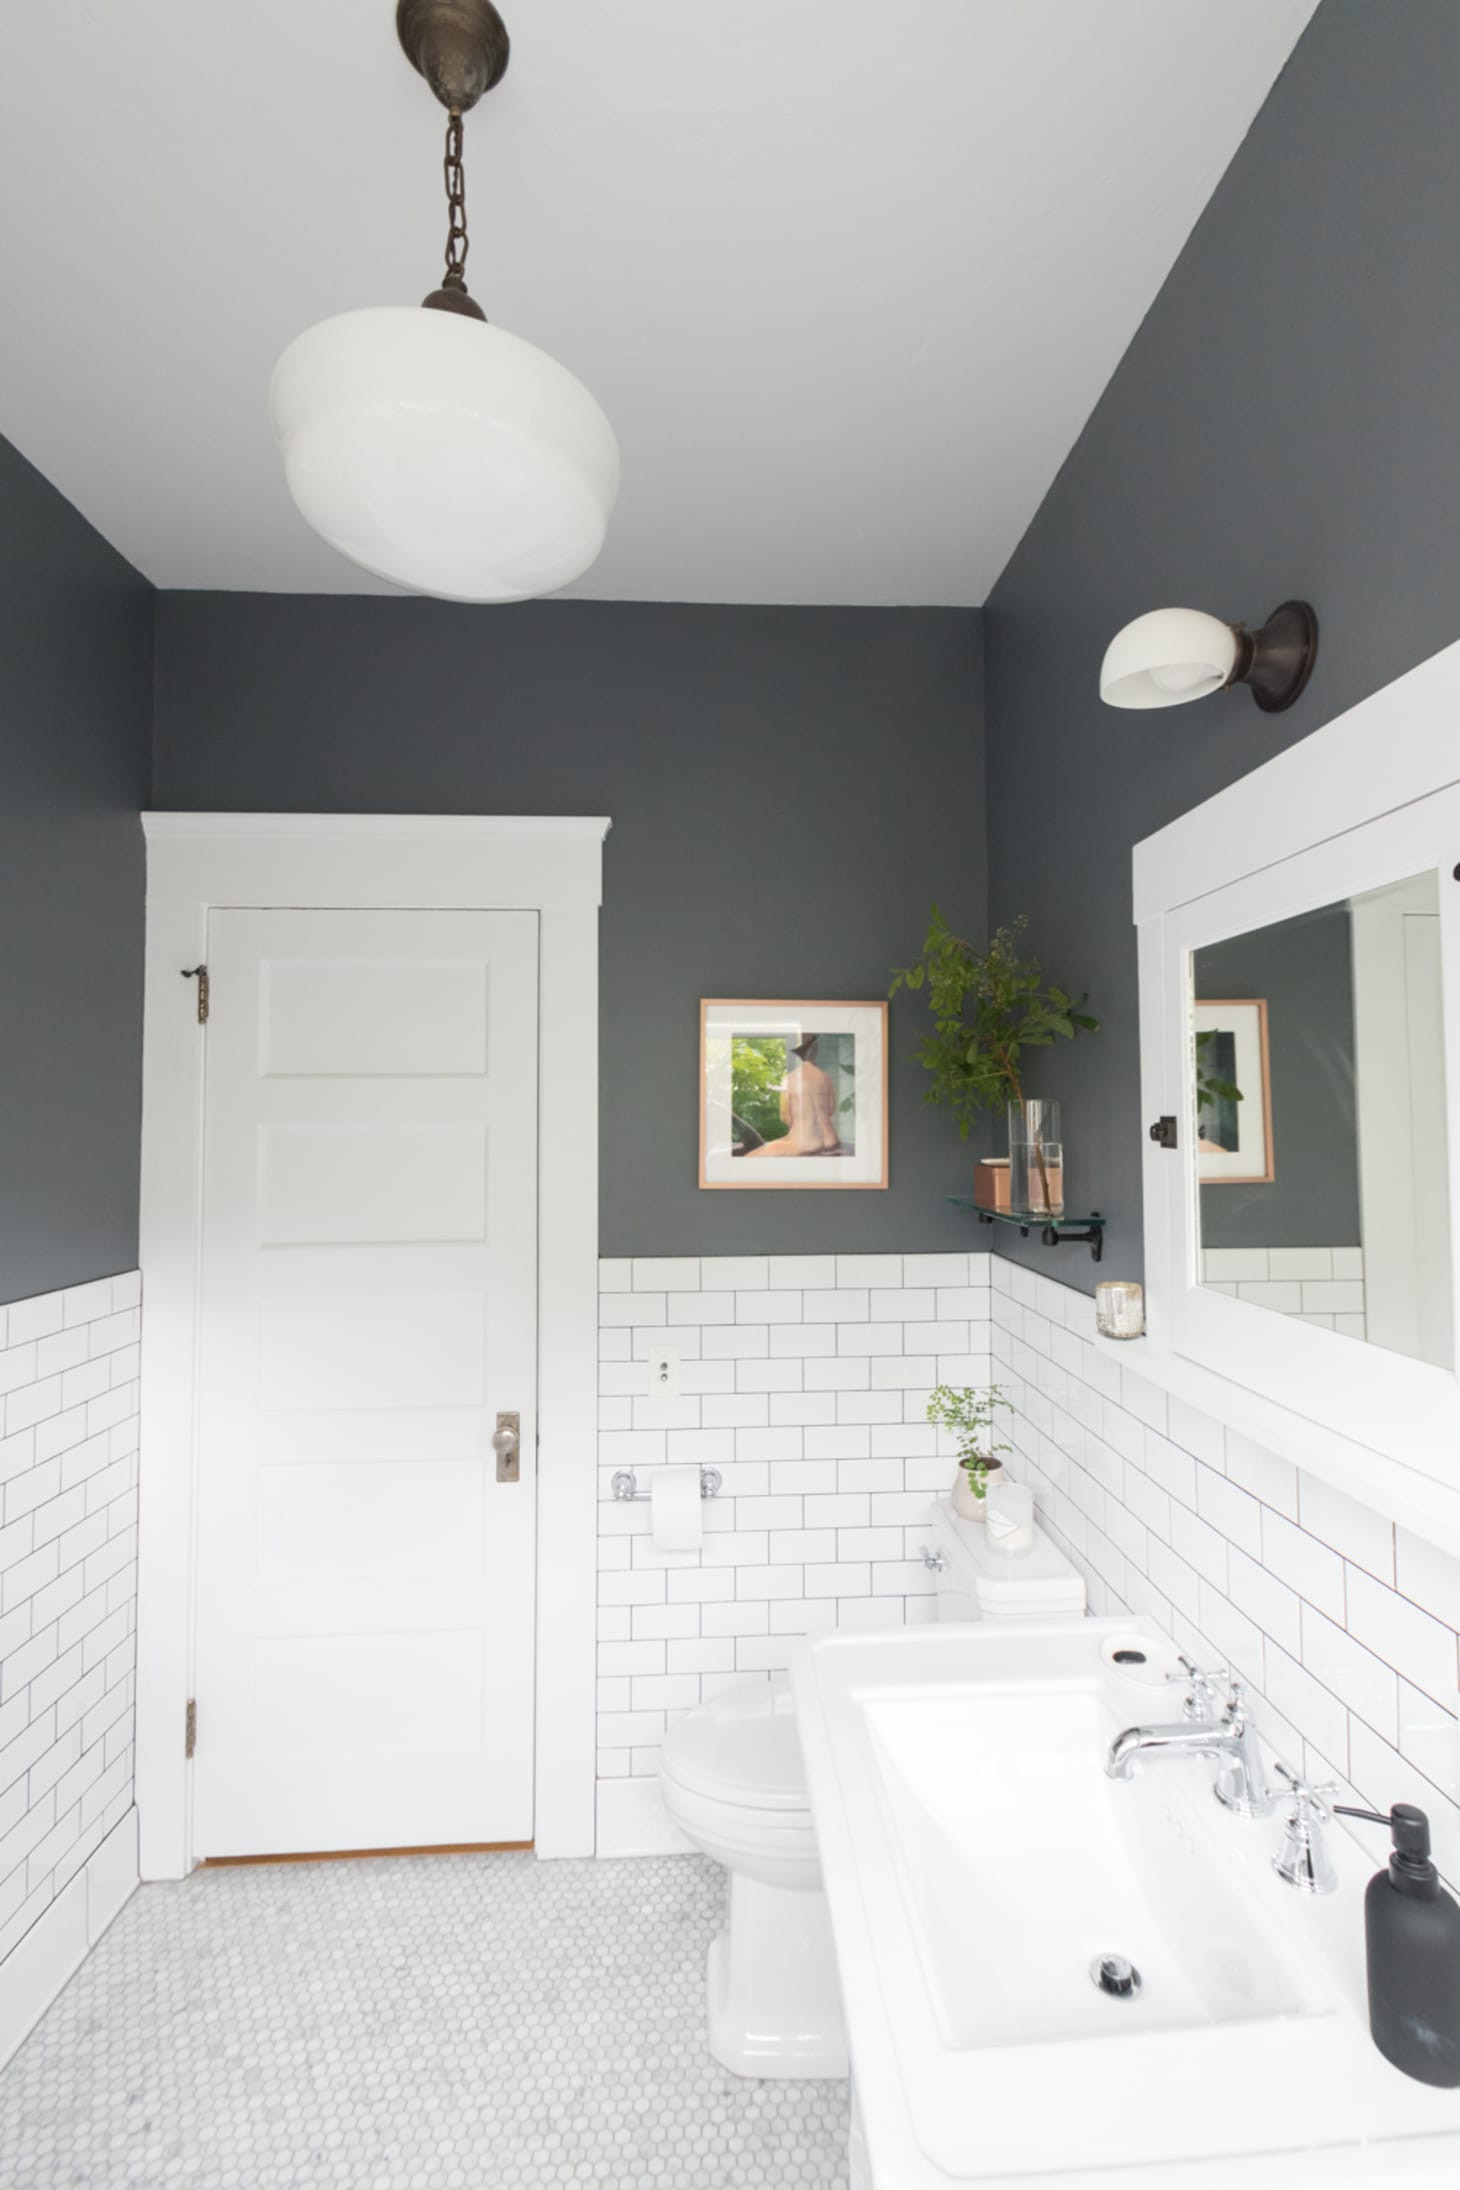 Popular Paint Colors For Bathrooms
 The 30 Best Bathroom Colors Bathroom Paint Color Ideas